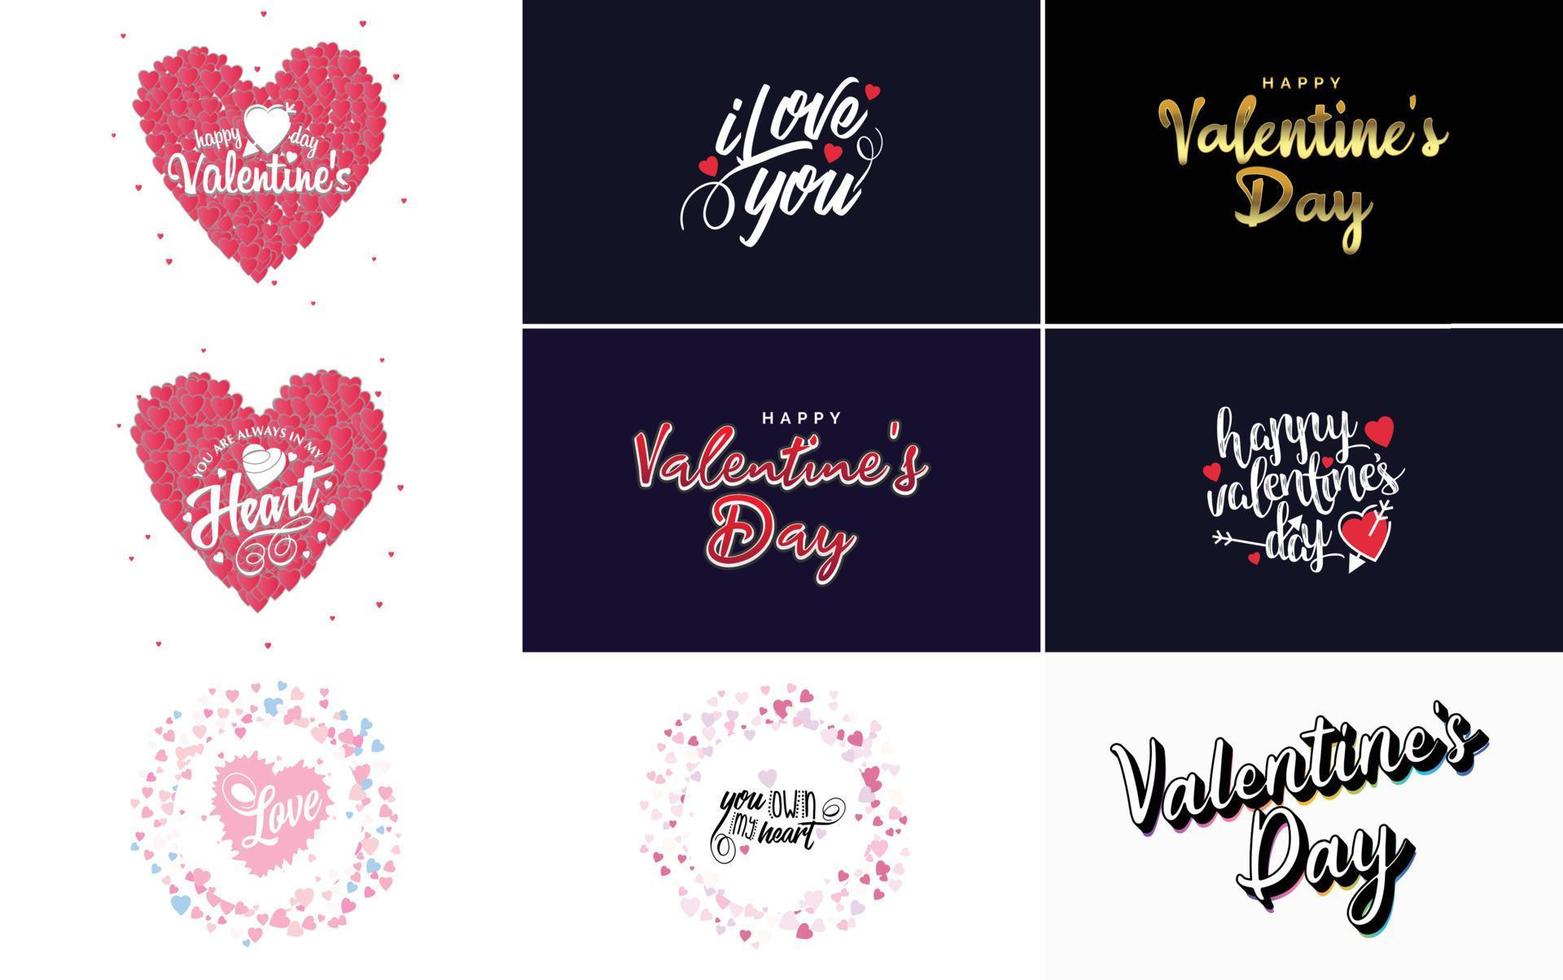 Valentine lettering with a heart design. Suitable for use in Valentine's Day cards and invitations vector